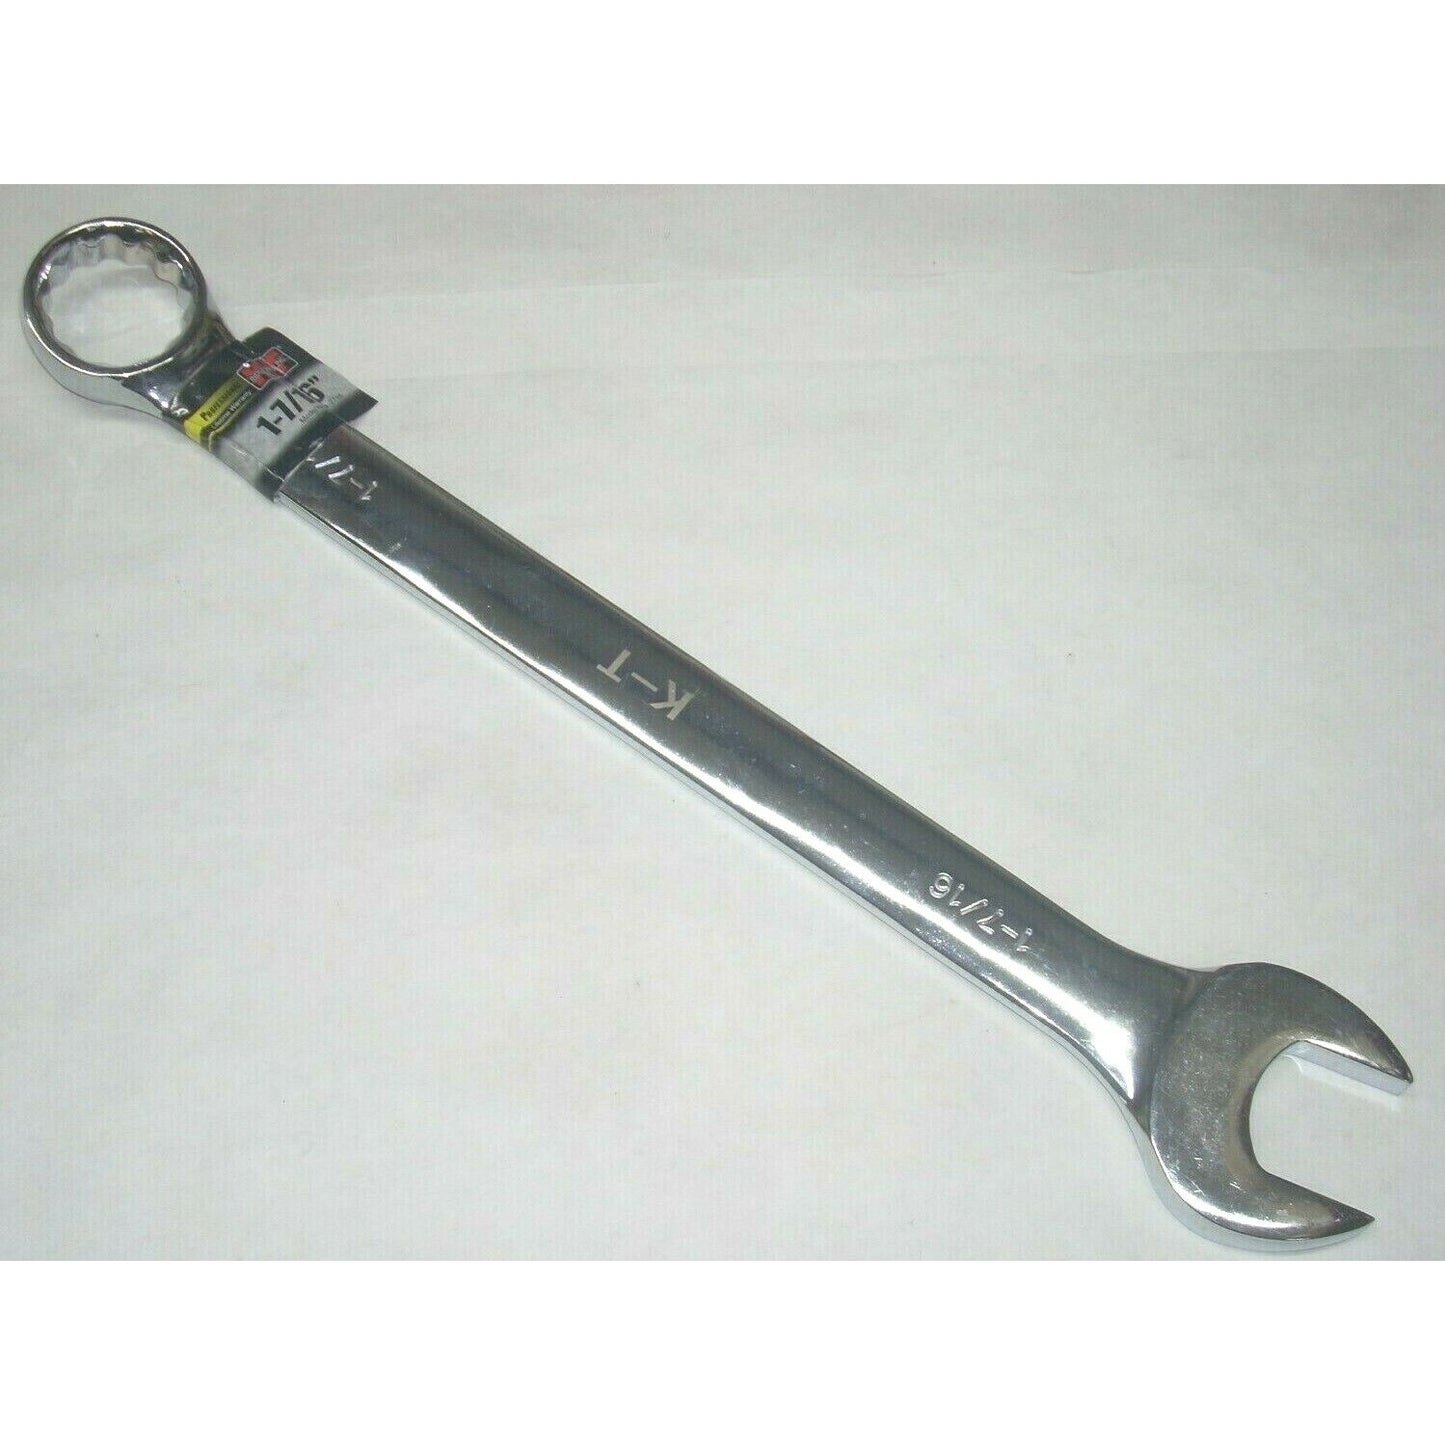 KT Industries 4-2746 Combination Wrench 1 7/16"